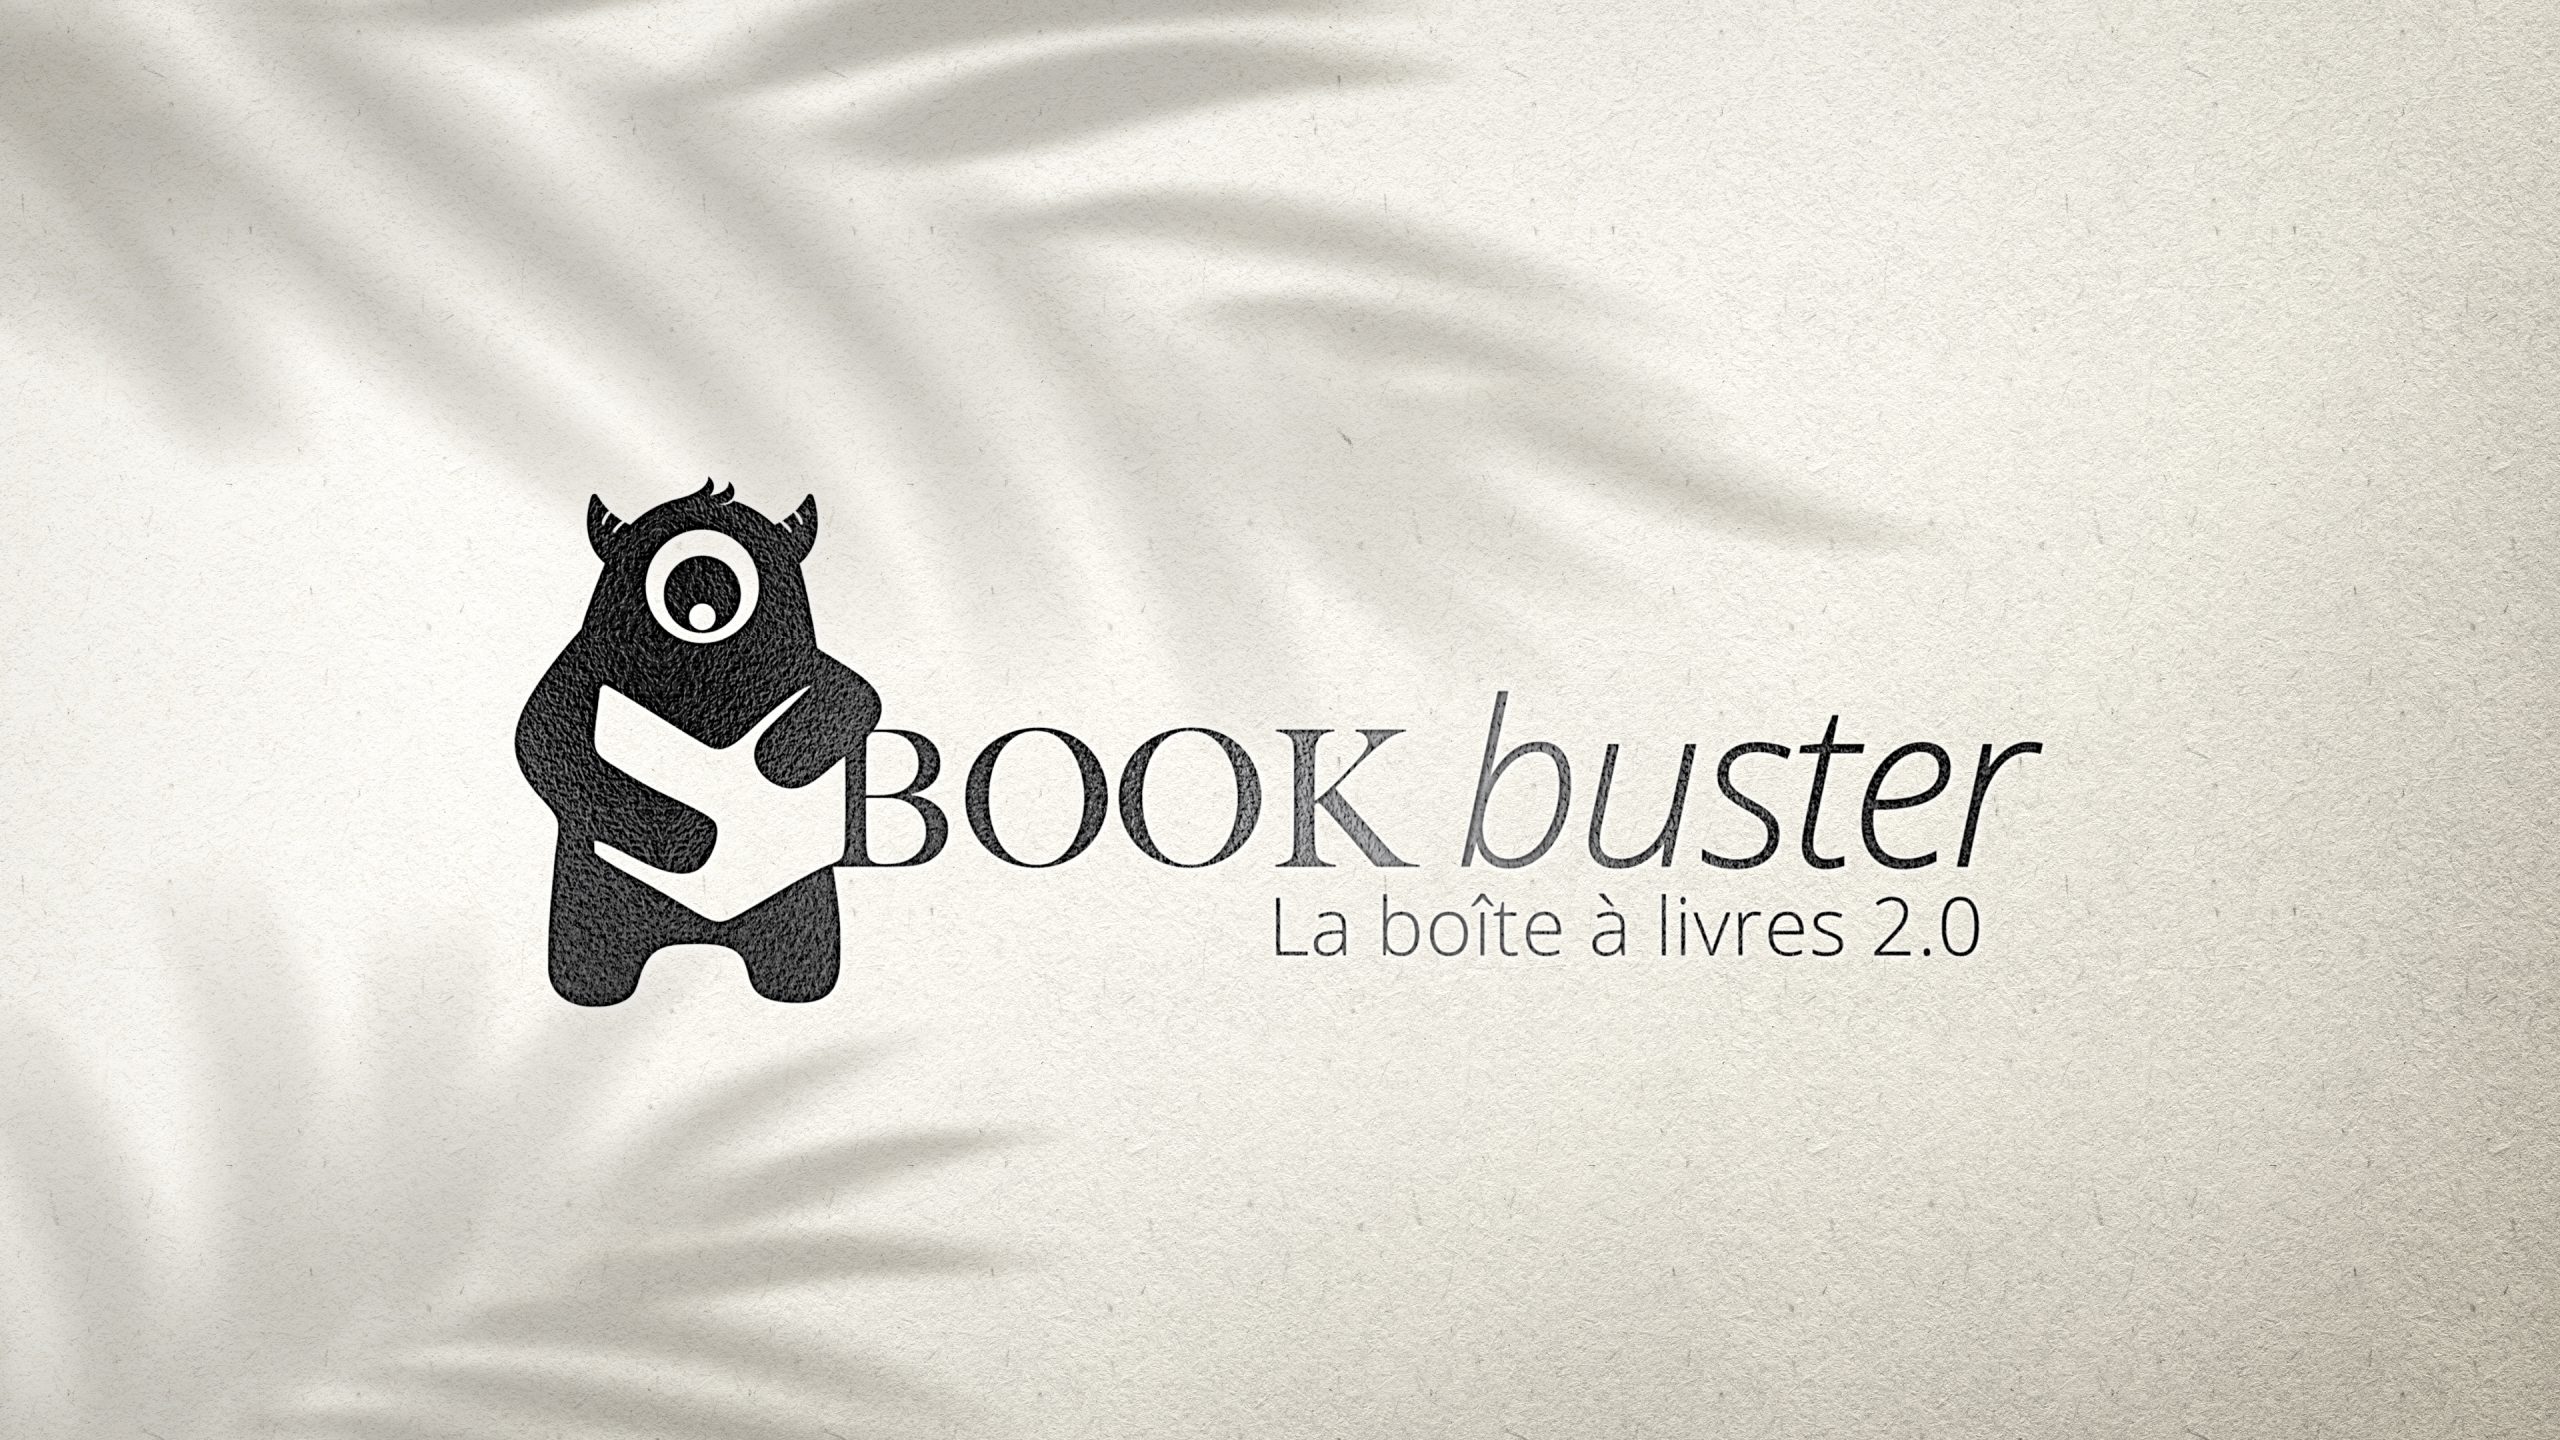 BOOK BUSTER